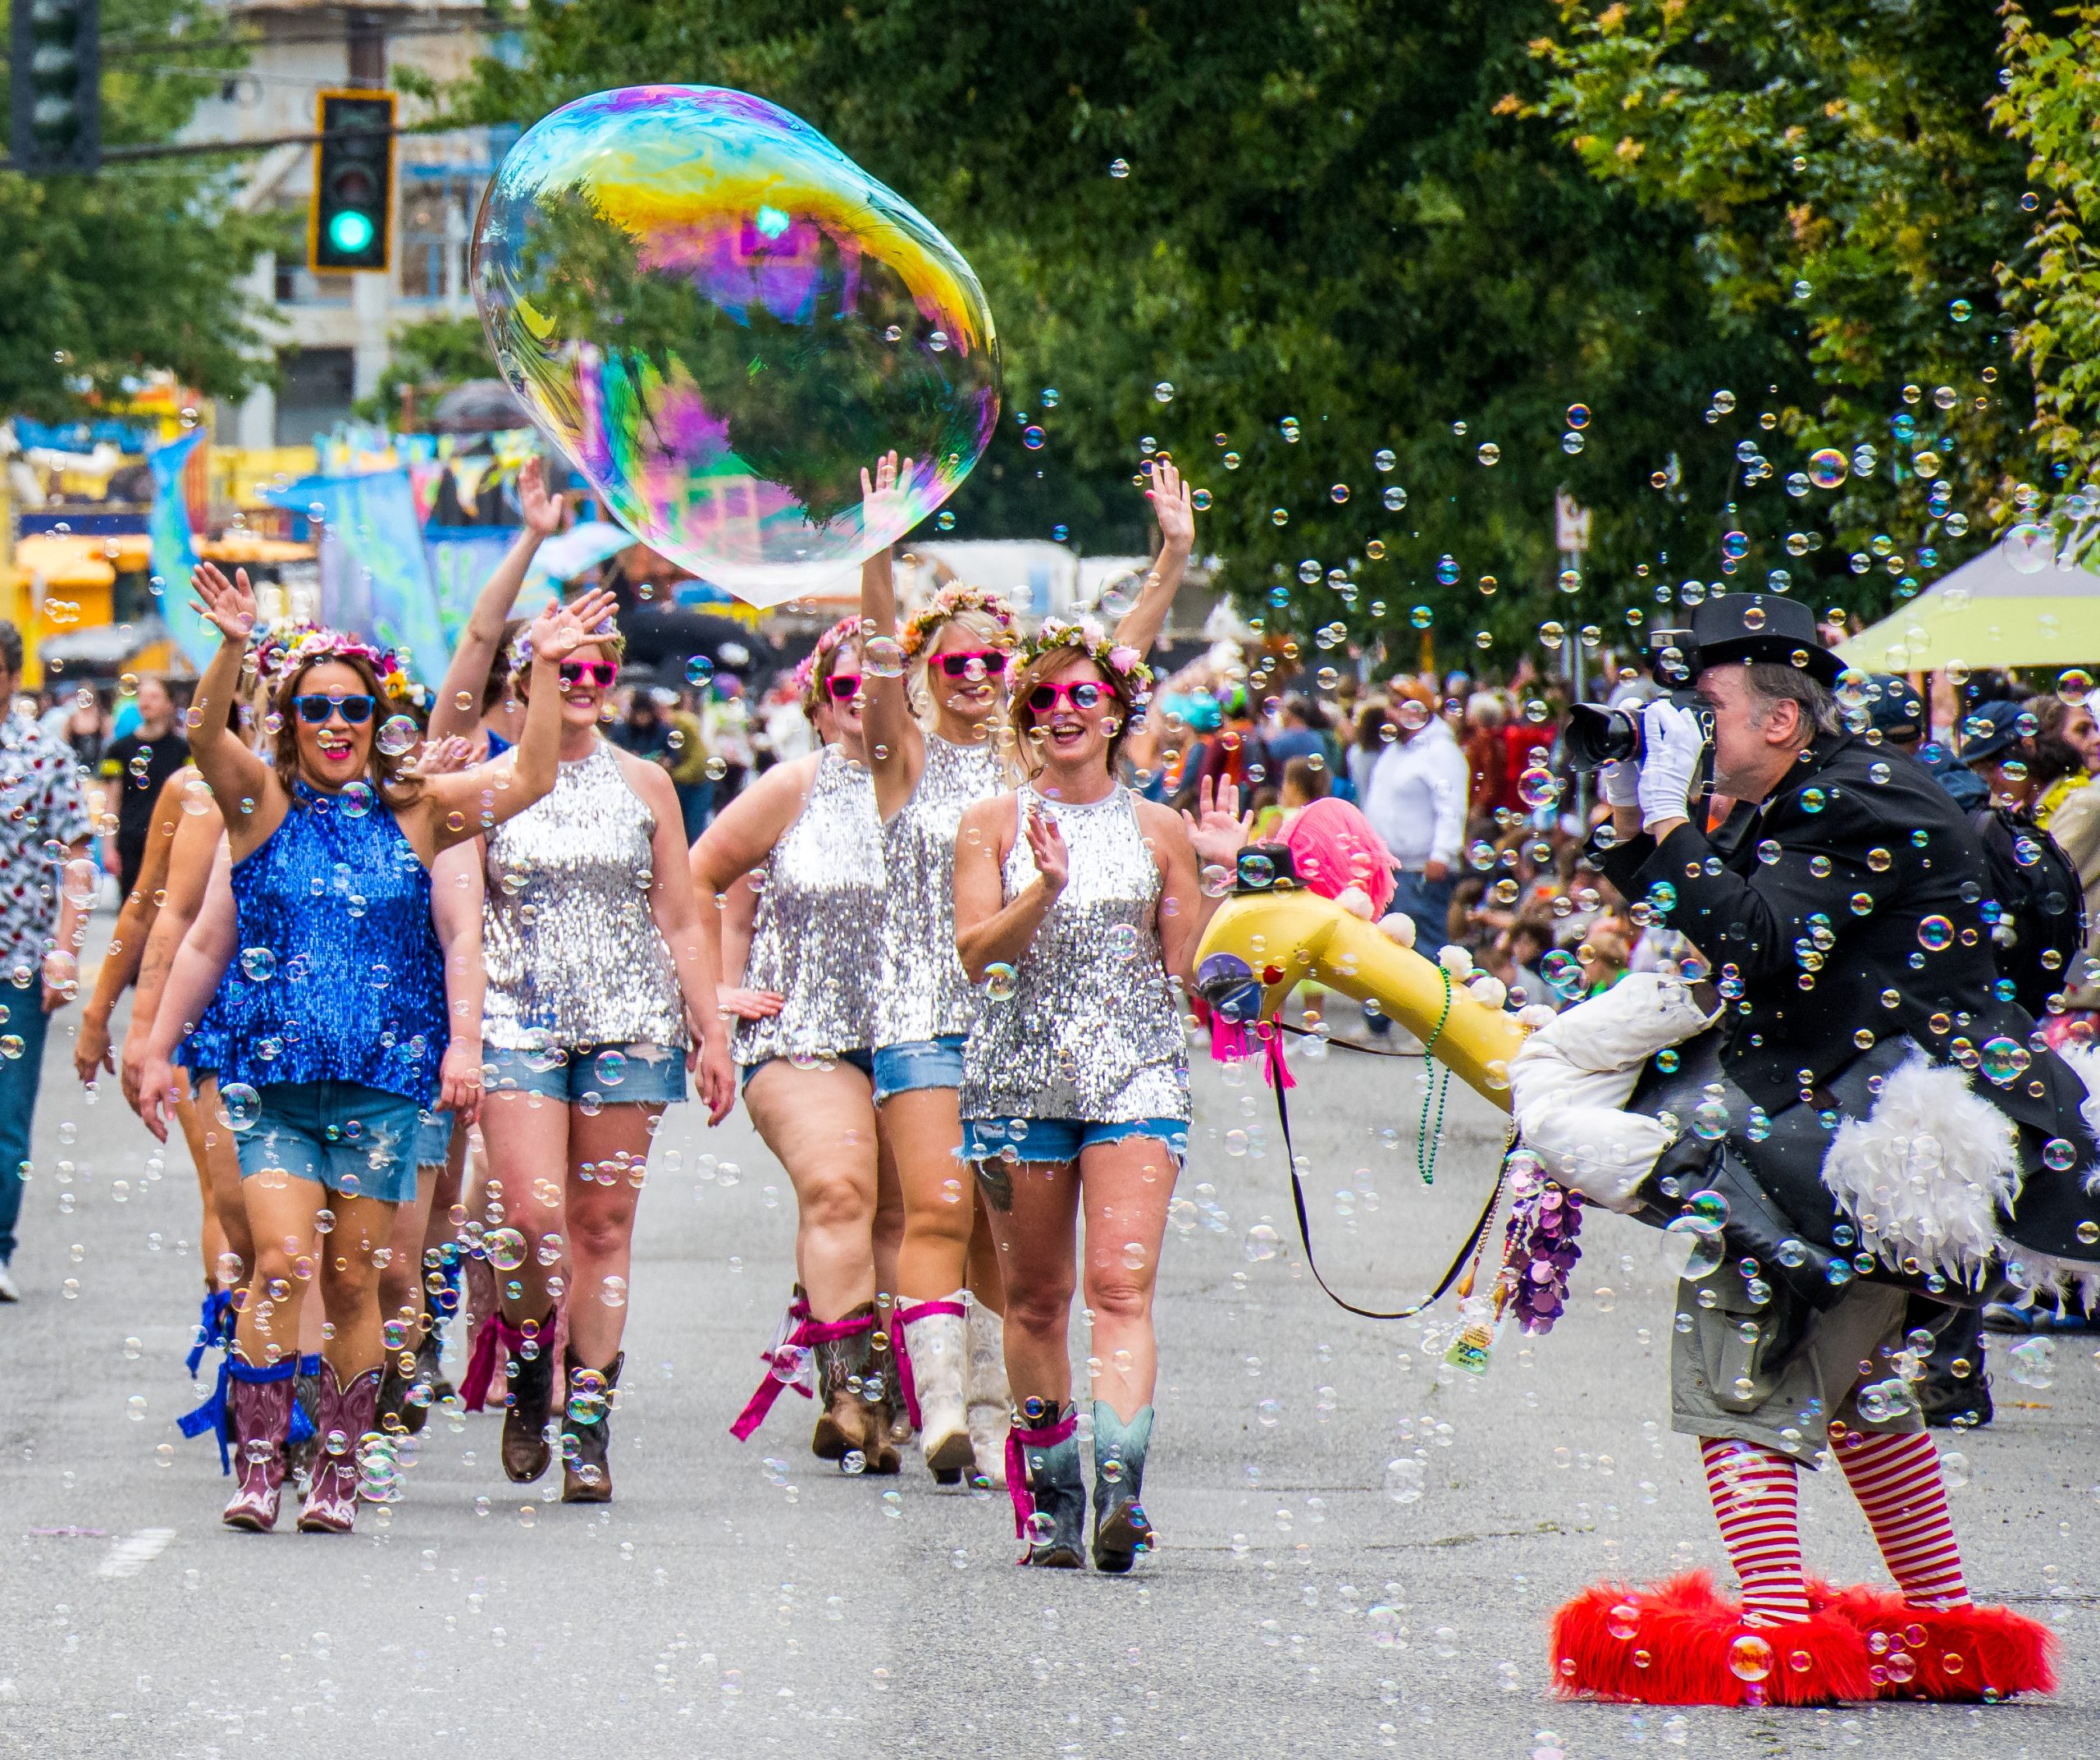 A group of people in glittery shirts at the Fremont Solstice Parade with bubbles flying everywhere. There is a person in a costume taking photos.